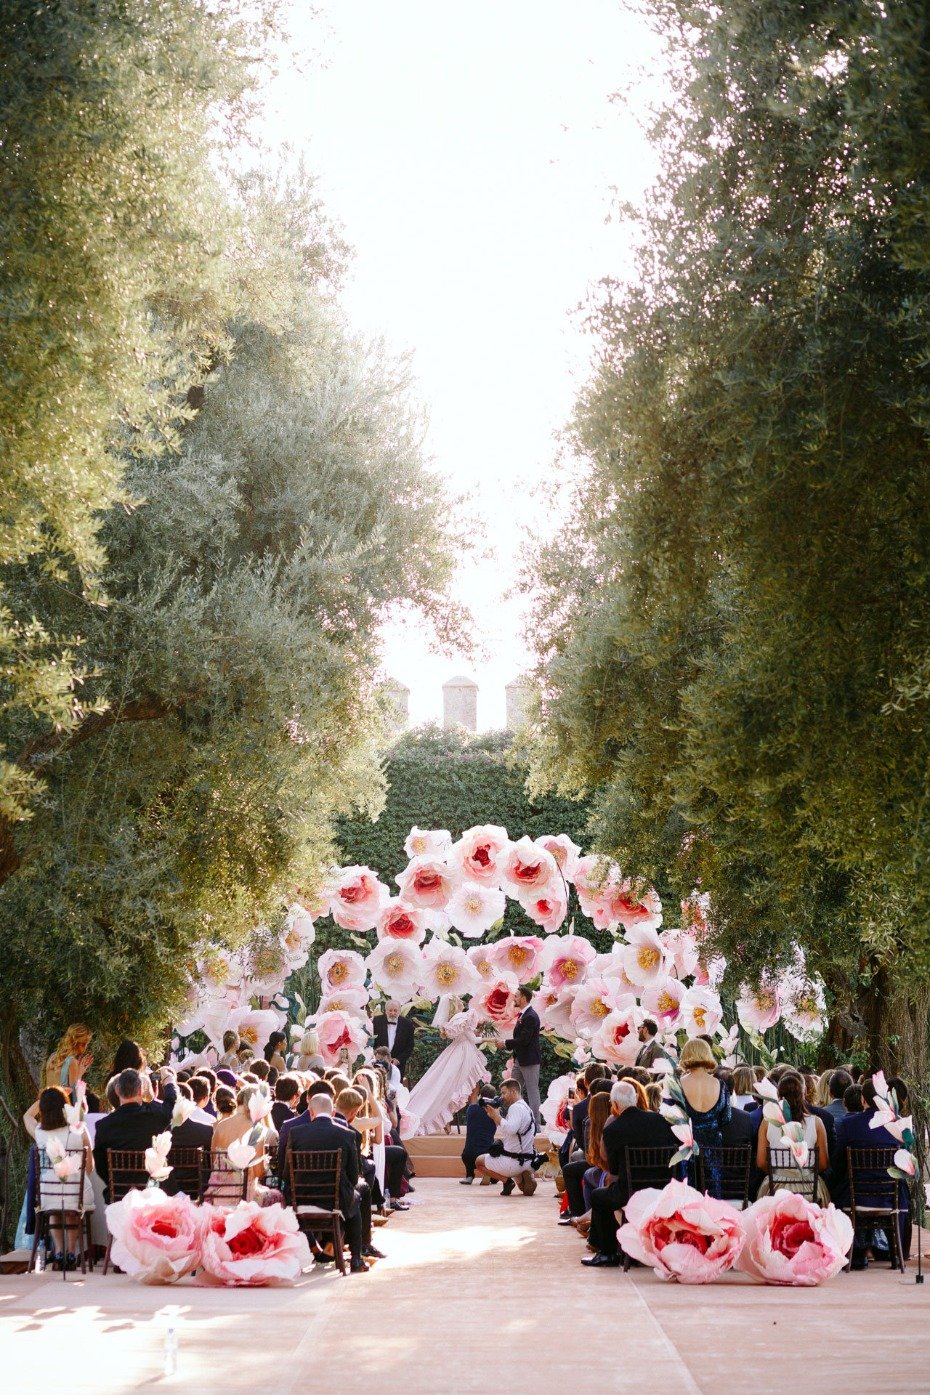 wedding ceremony with giant paper flowers